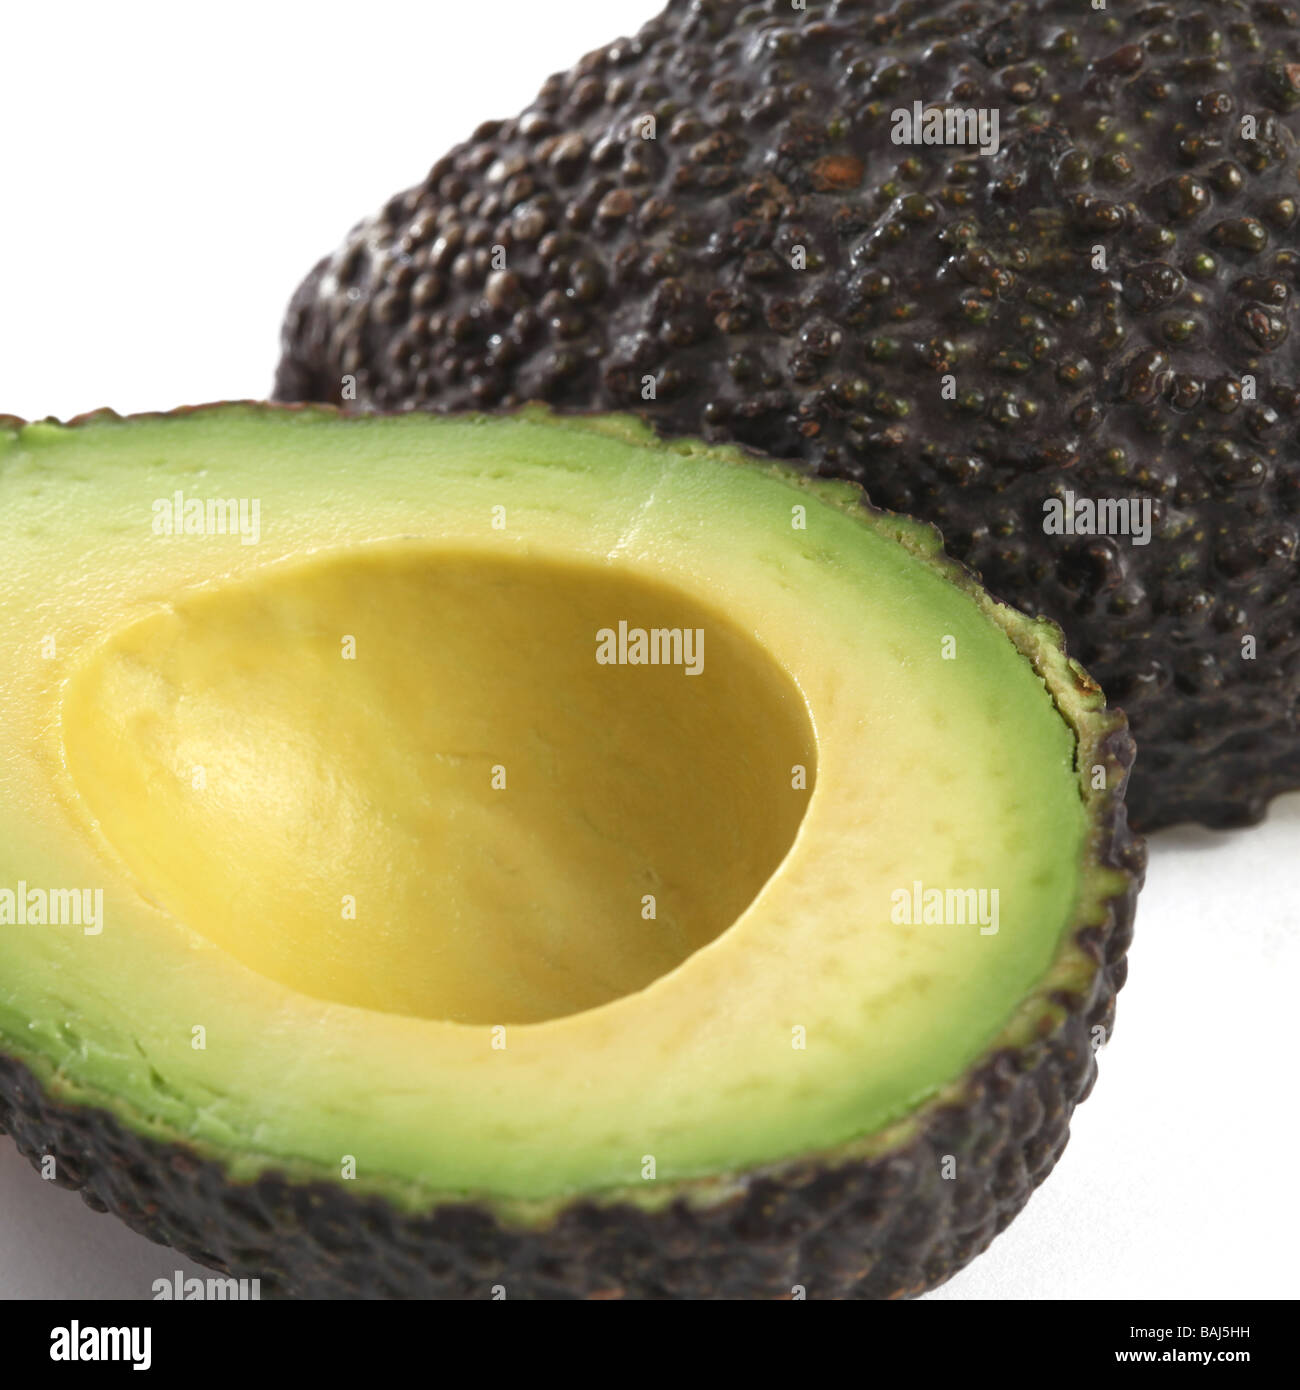 Close up of an avocado pear on a white background Stock Photo